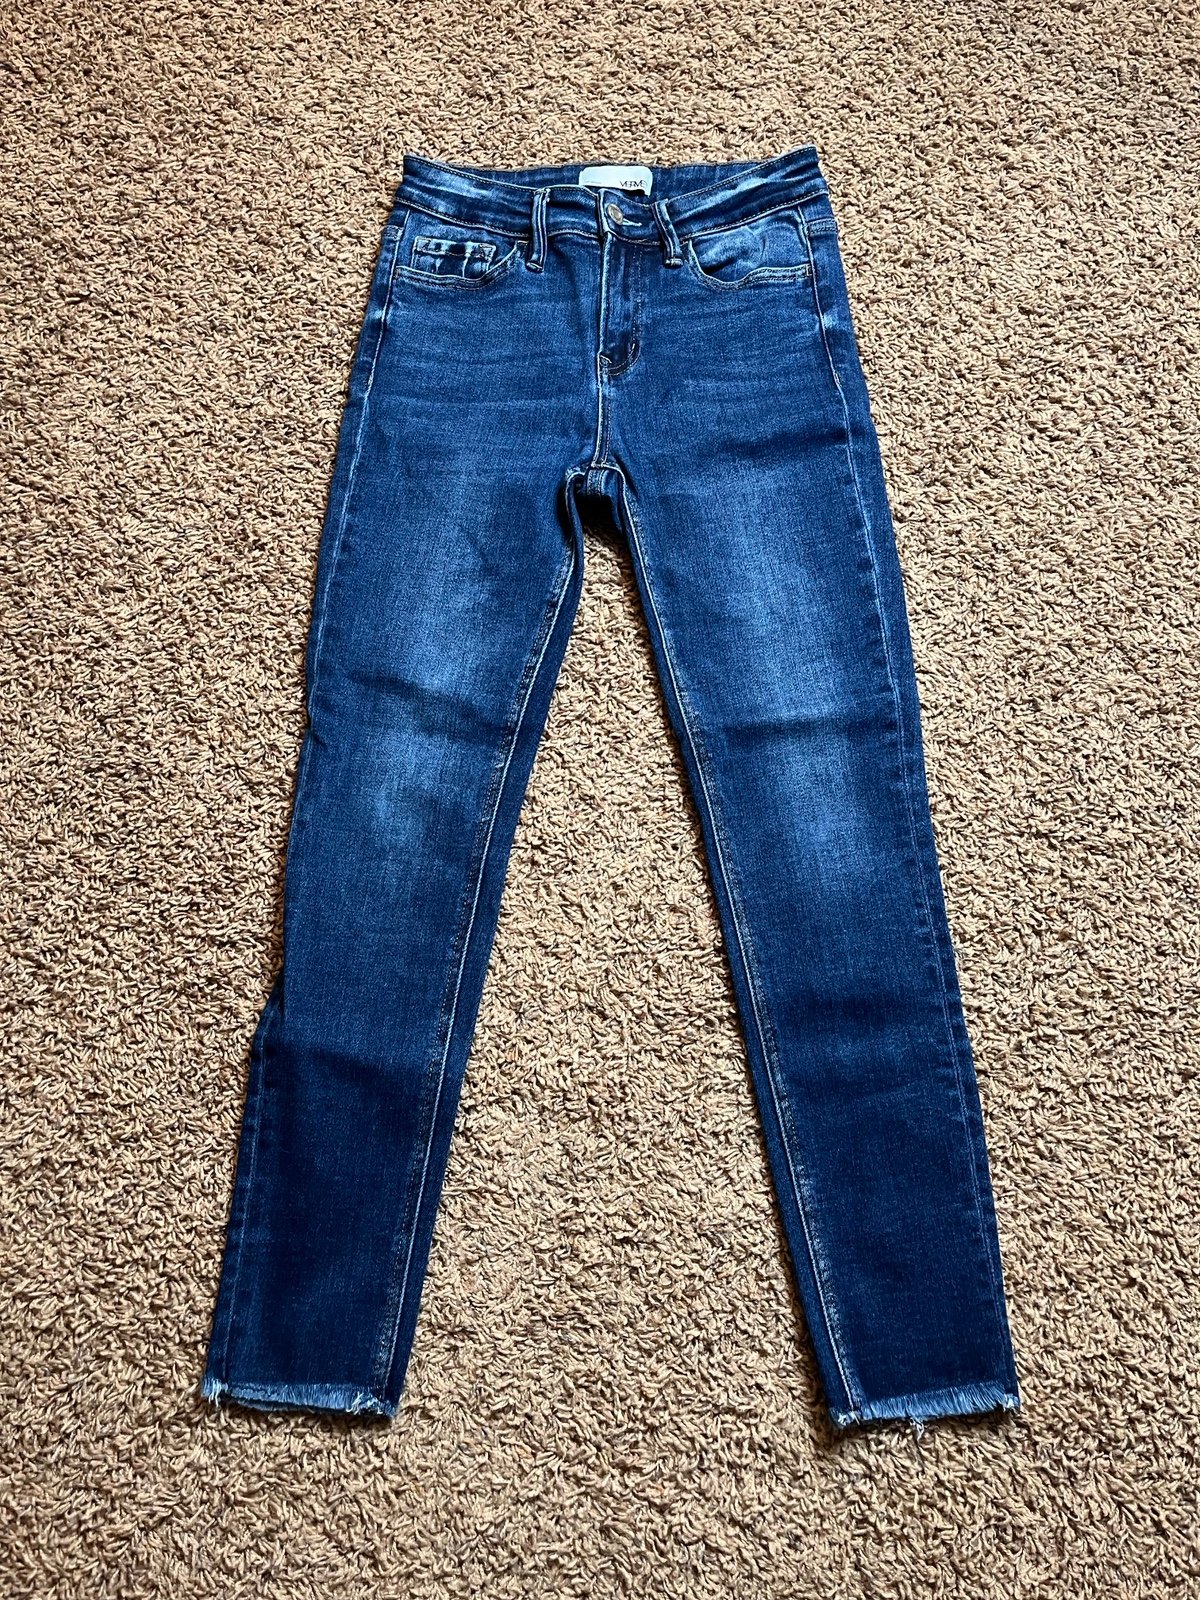 Authentic Women’s Vervet Skinny Raw Hem Cropped Jeans Size 26x26 IL:A GsgwSO93j just for you